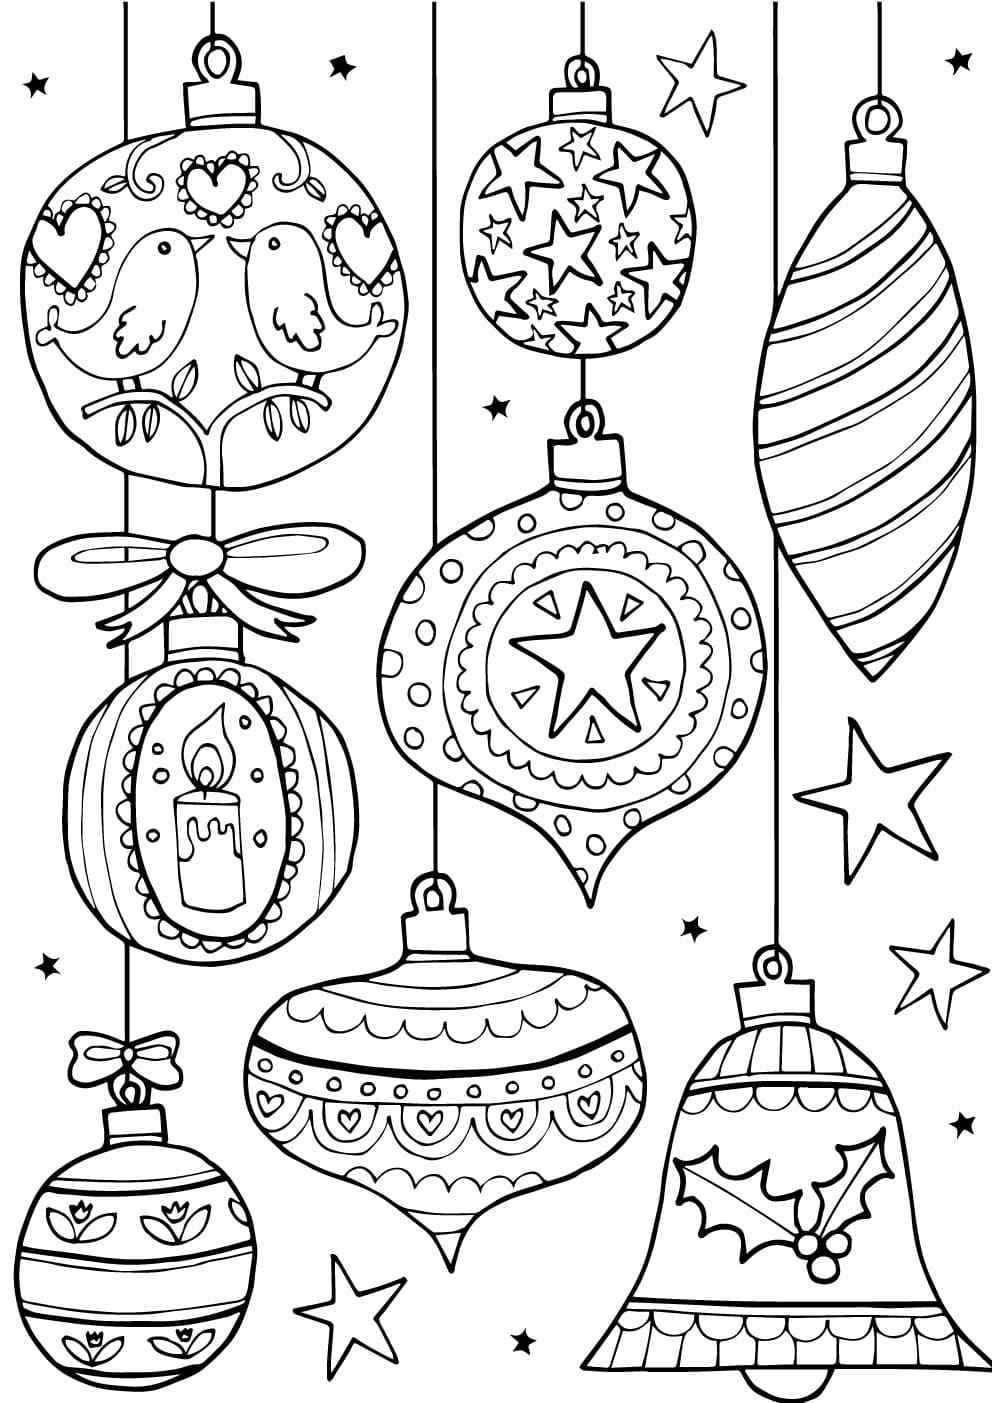 A Wall Decorated With Glass Toys Coloring Page